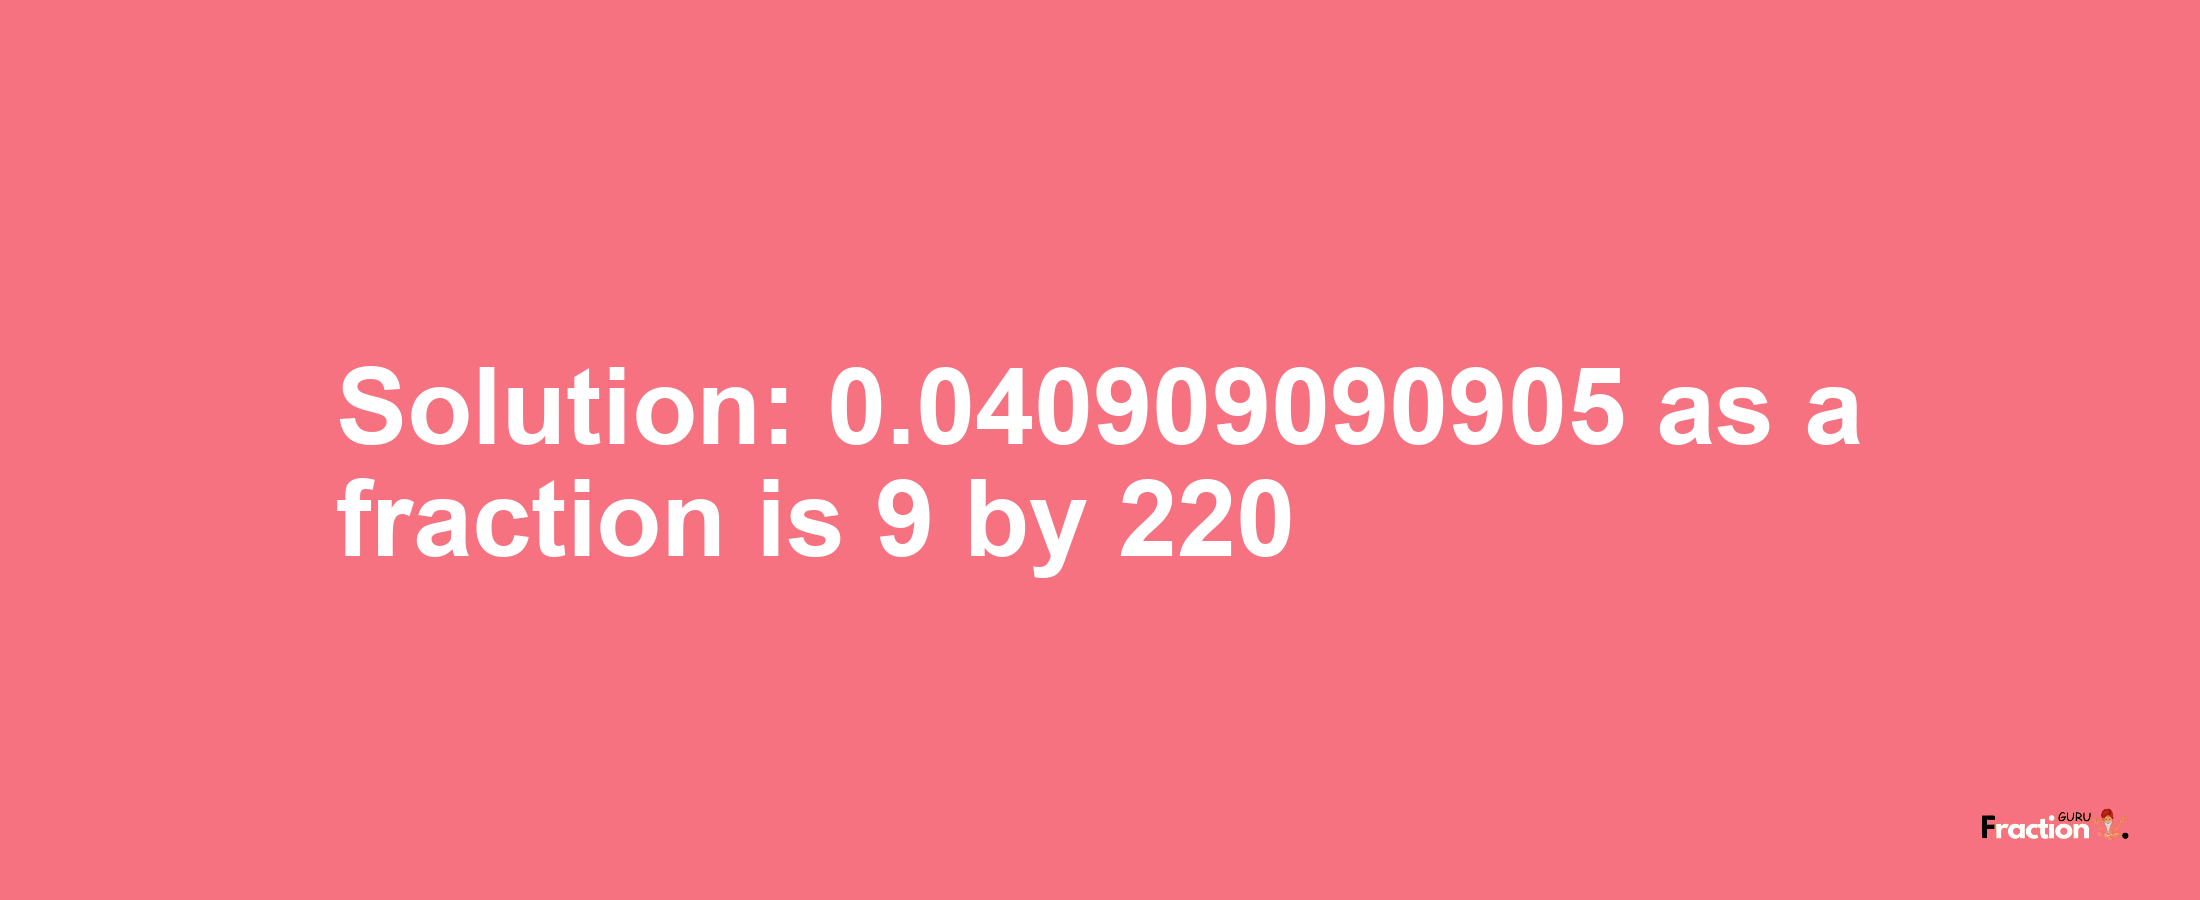 Solution:0.040909090905 as a fraction is 9/220